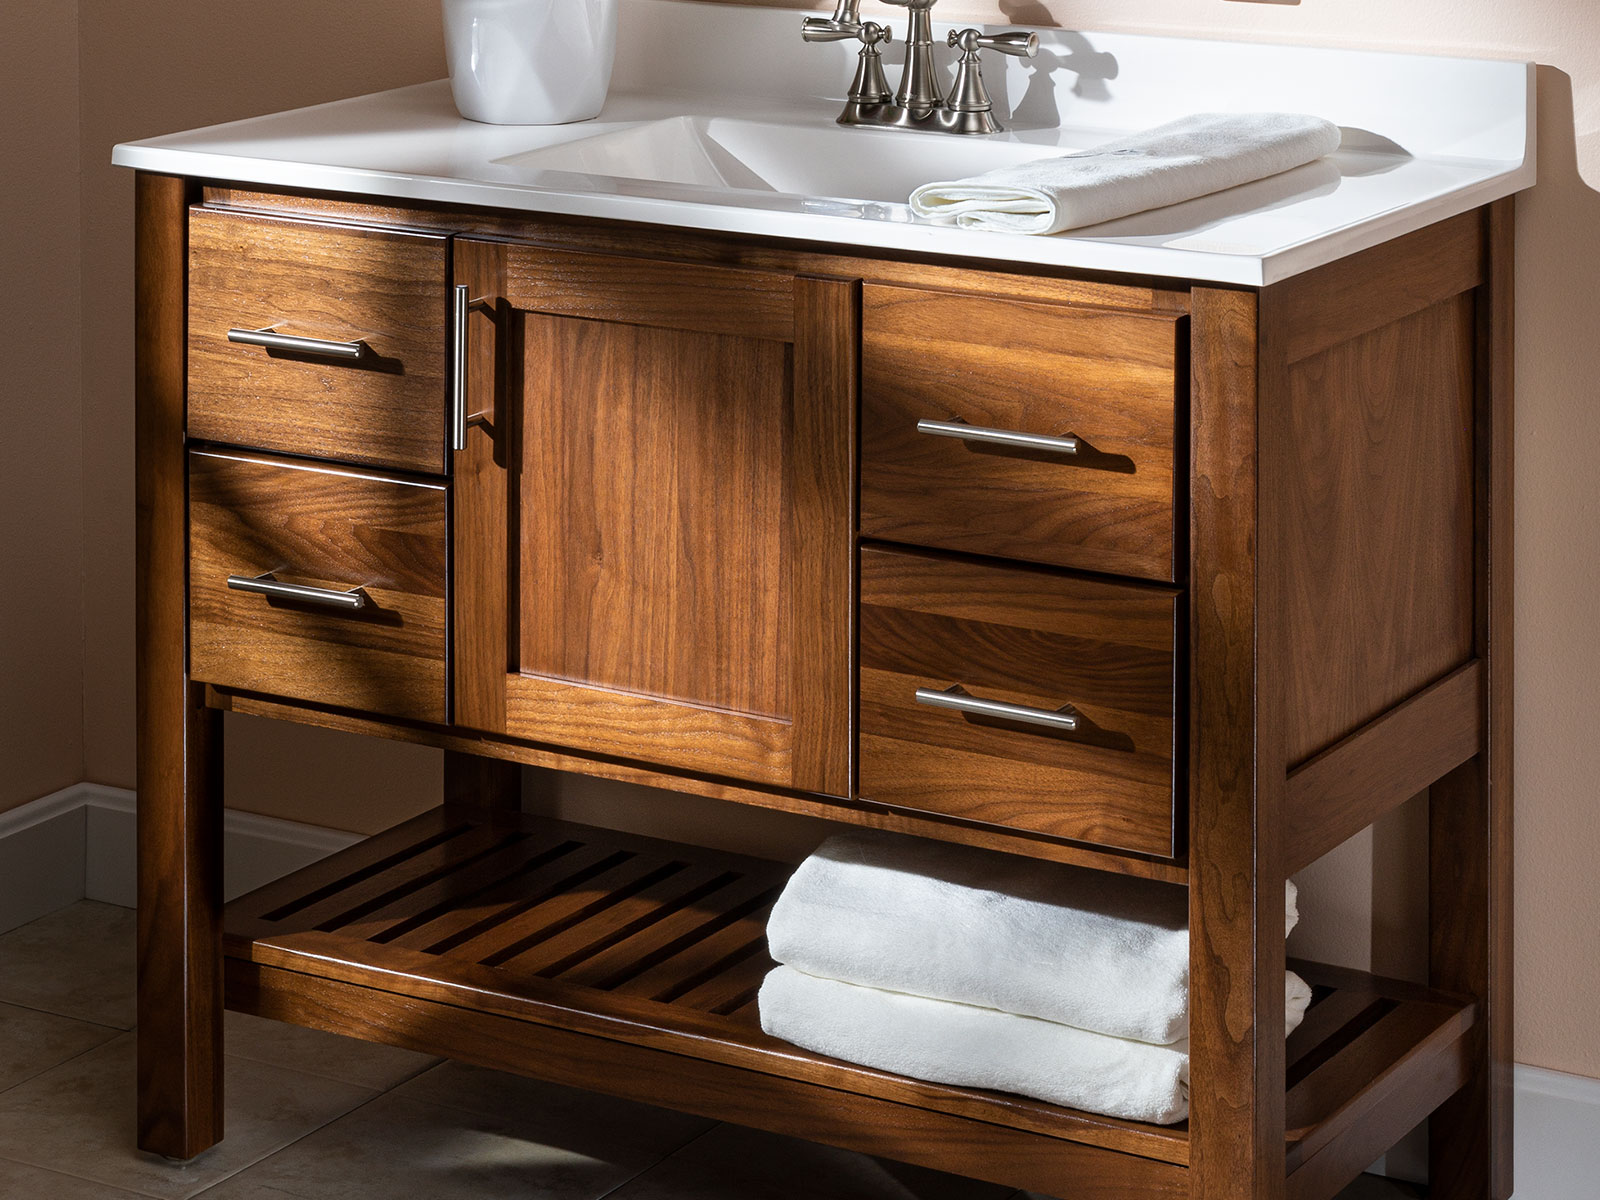 Bath Vanities And Cabinetry, Wood Vanity Cabinets For Bathrooms